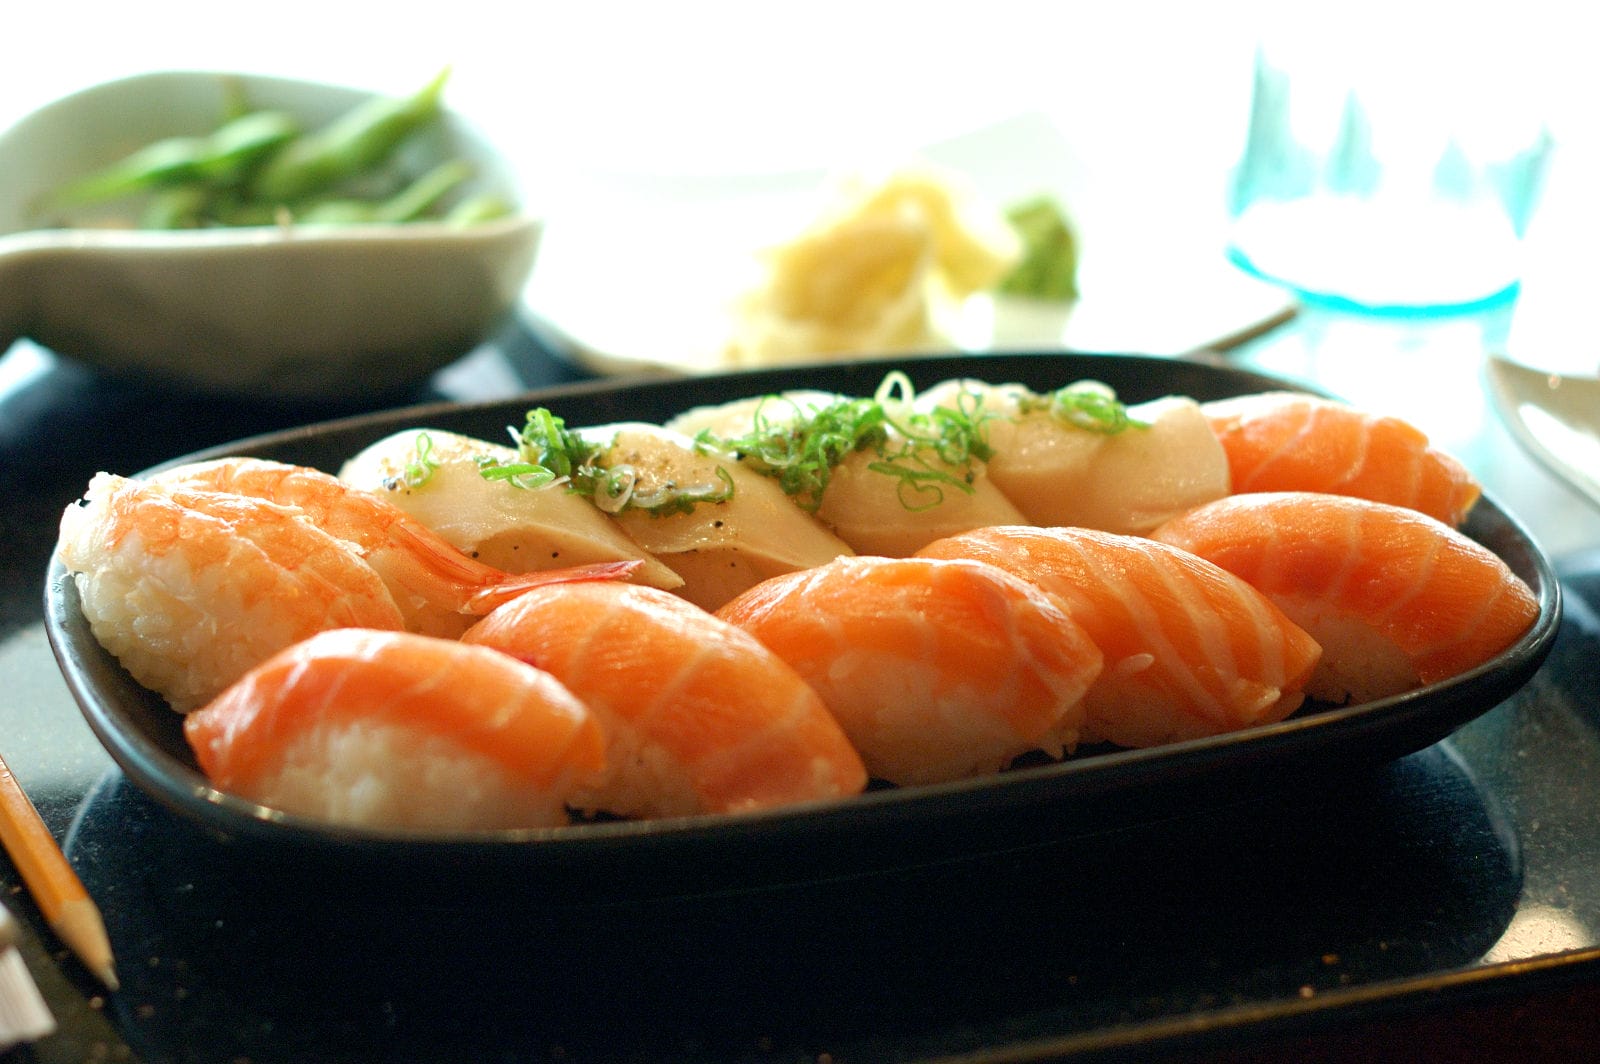 5 Reasons Why Pescetarians are Wrong About Fish